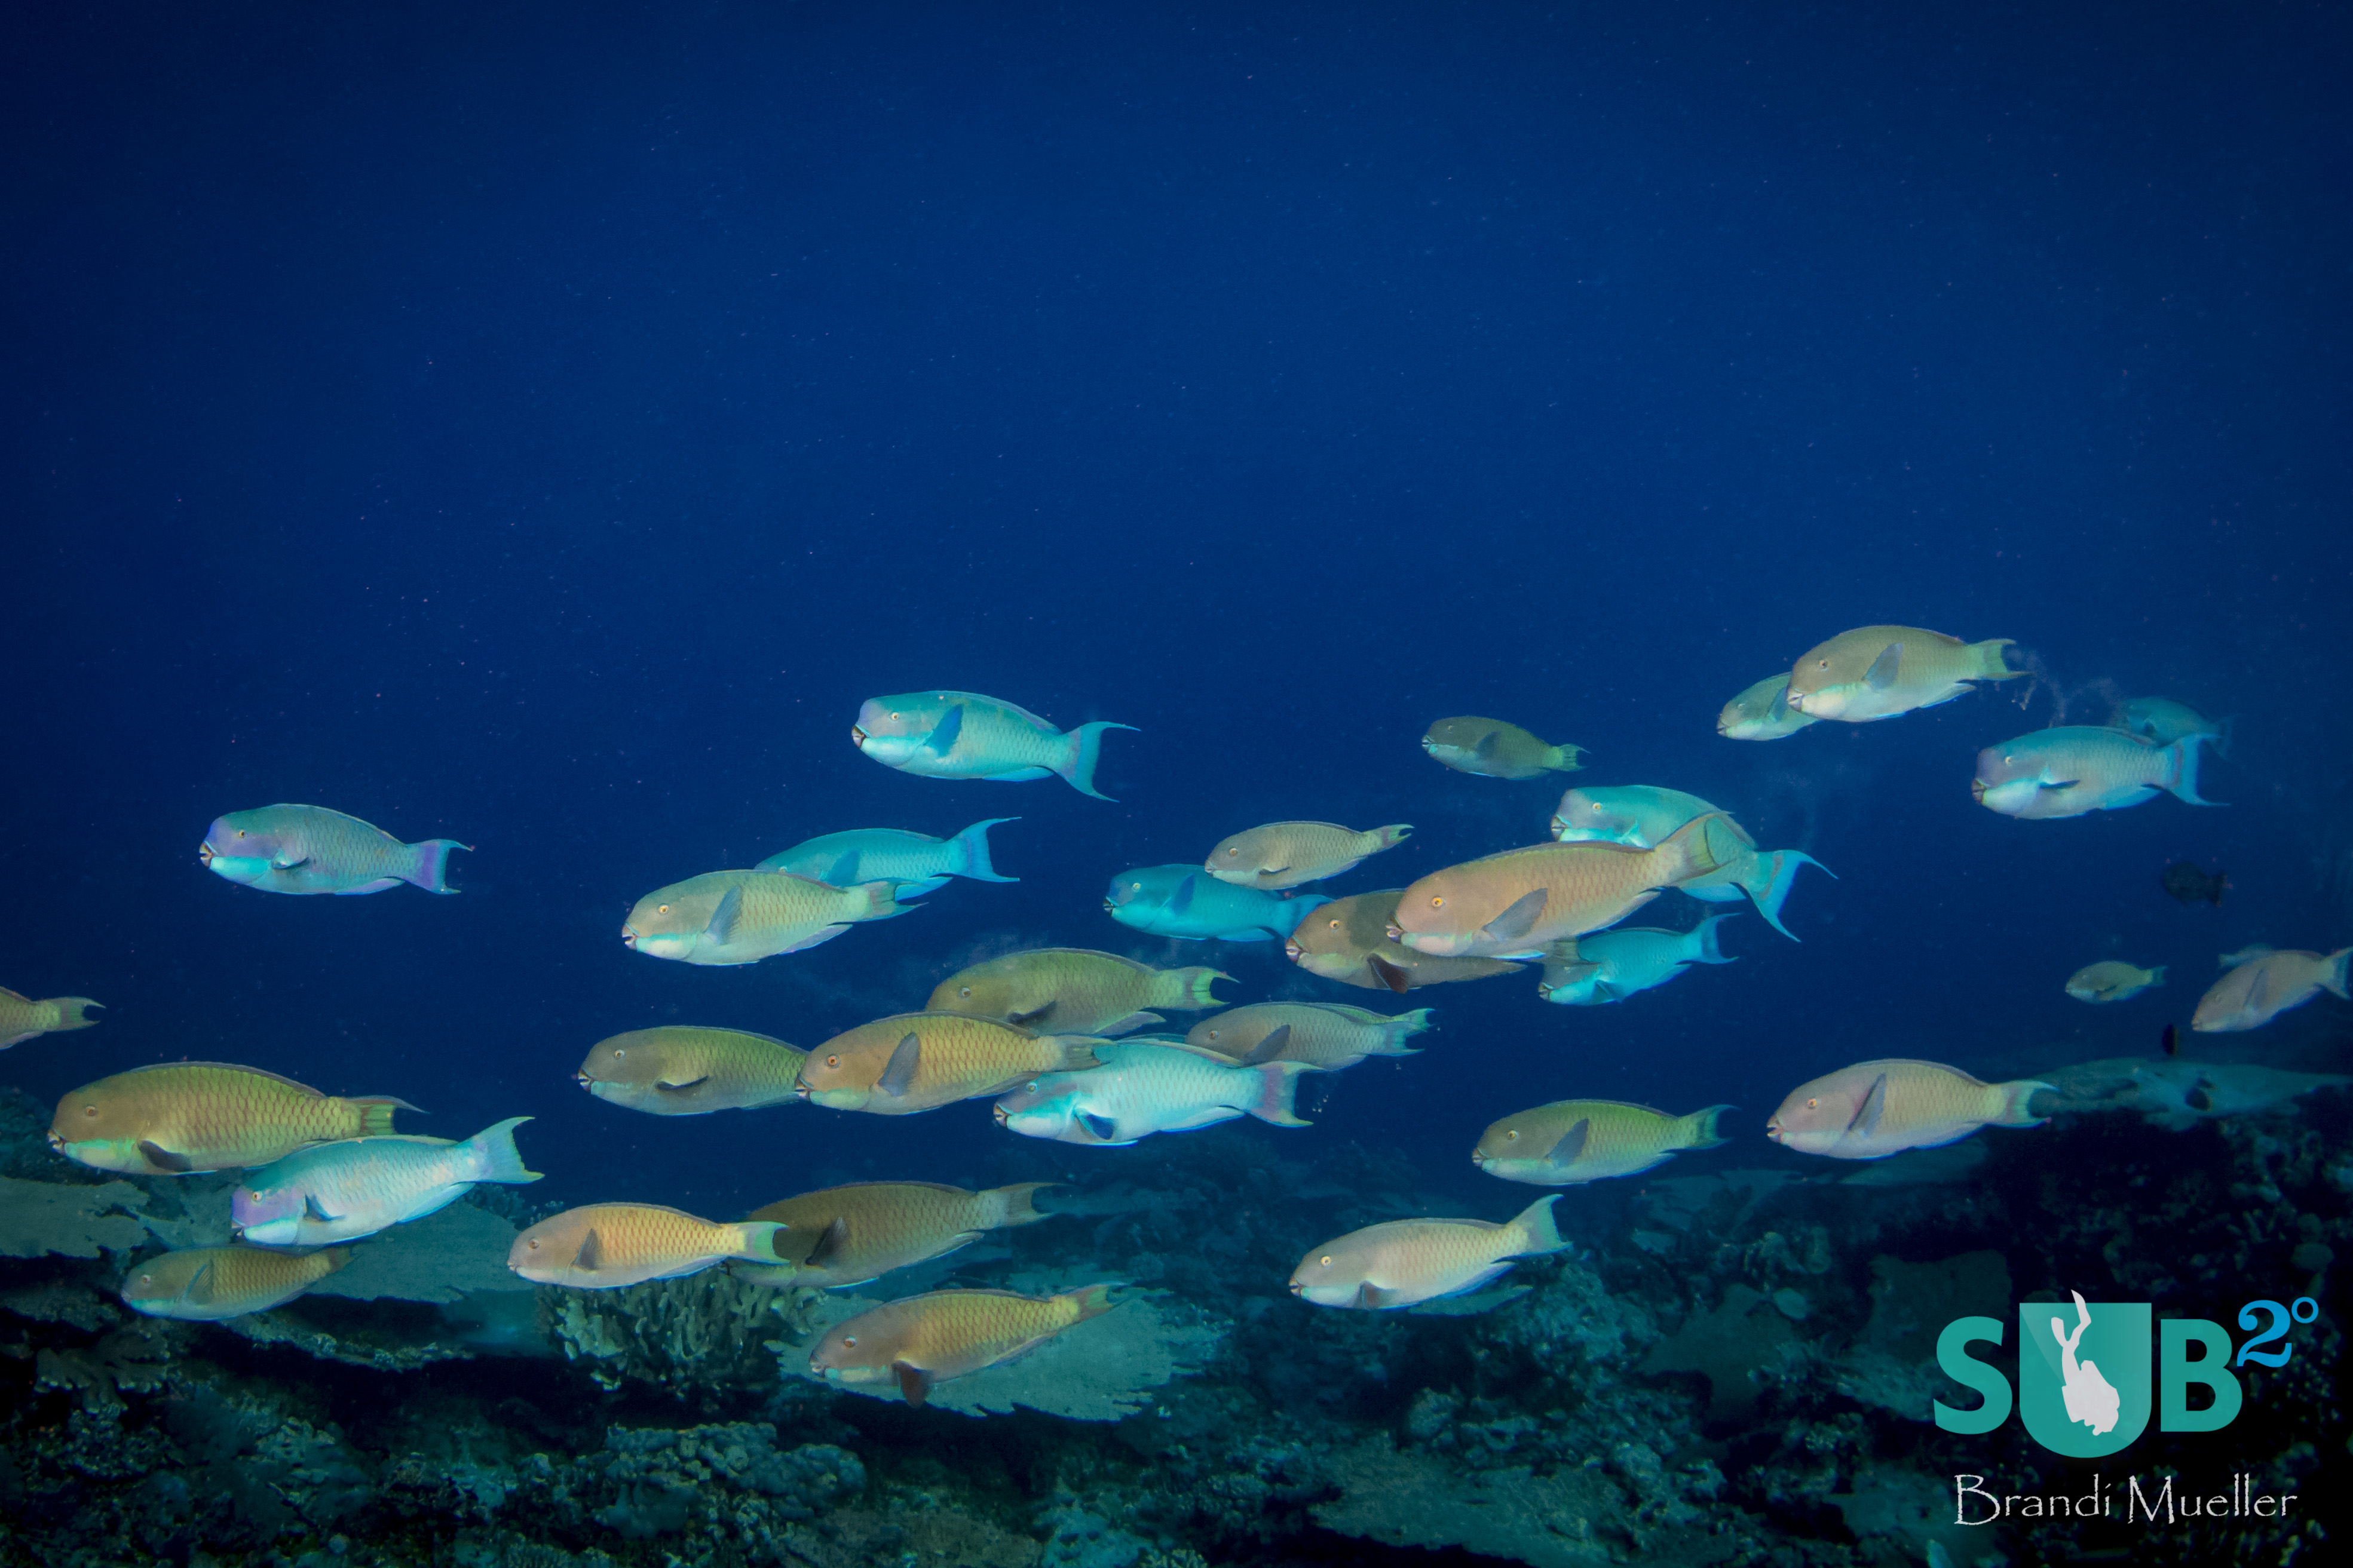 A large school of parrotfish swim over the reef, occasionally stopping to munch on some coral.